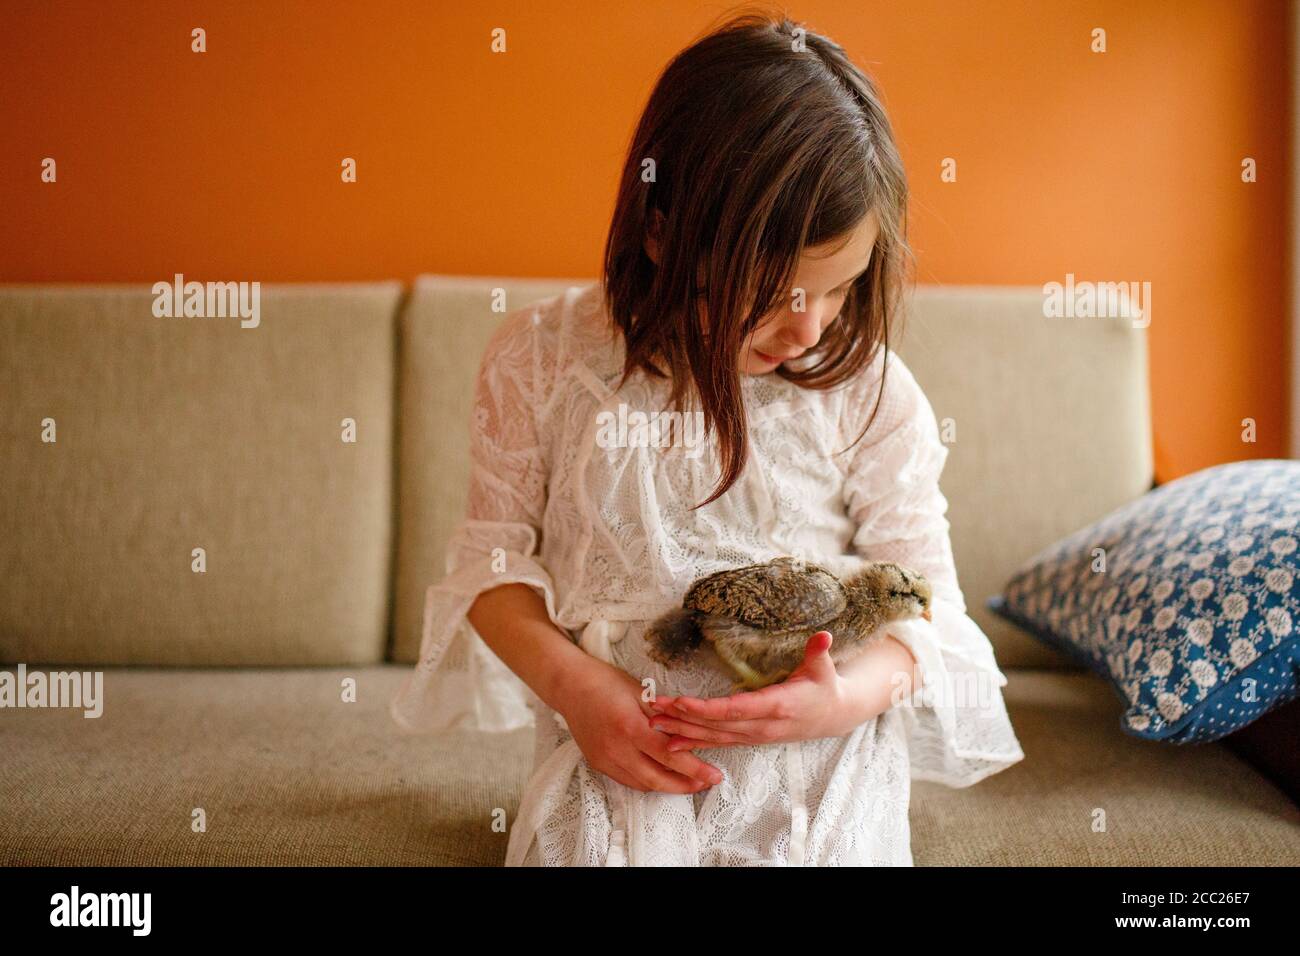 A small child sits with a small chick tenderly cradled in her arms Stock Photo